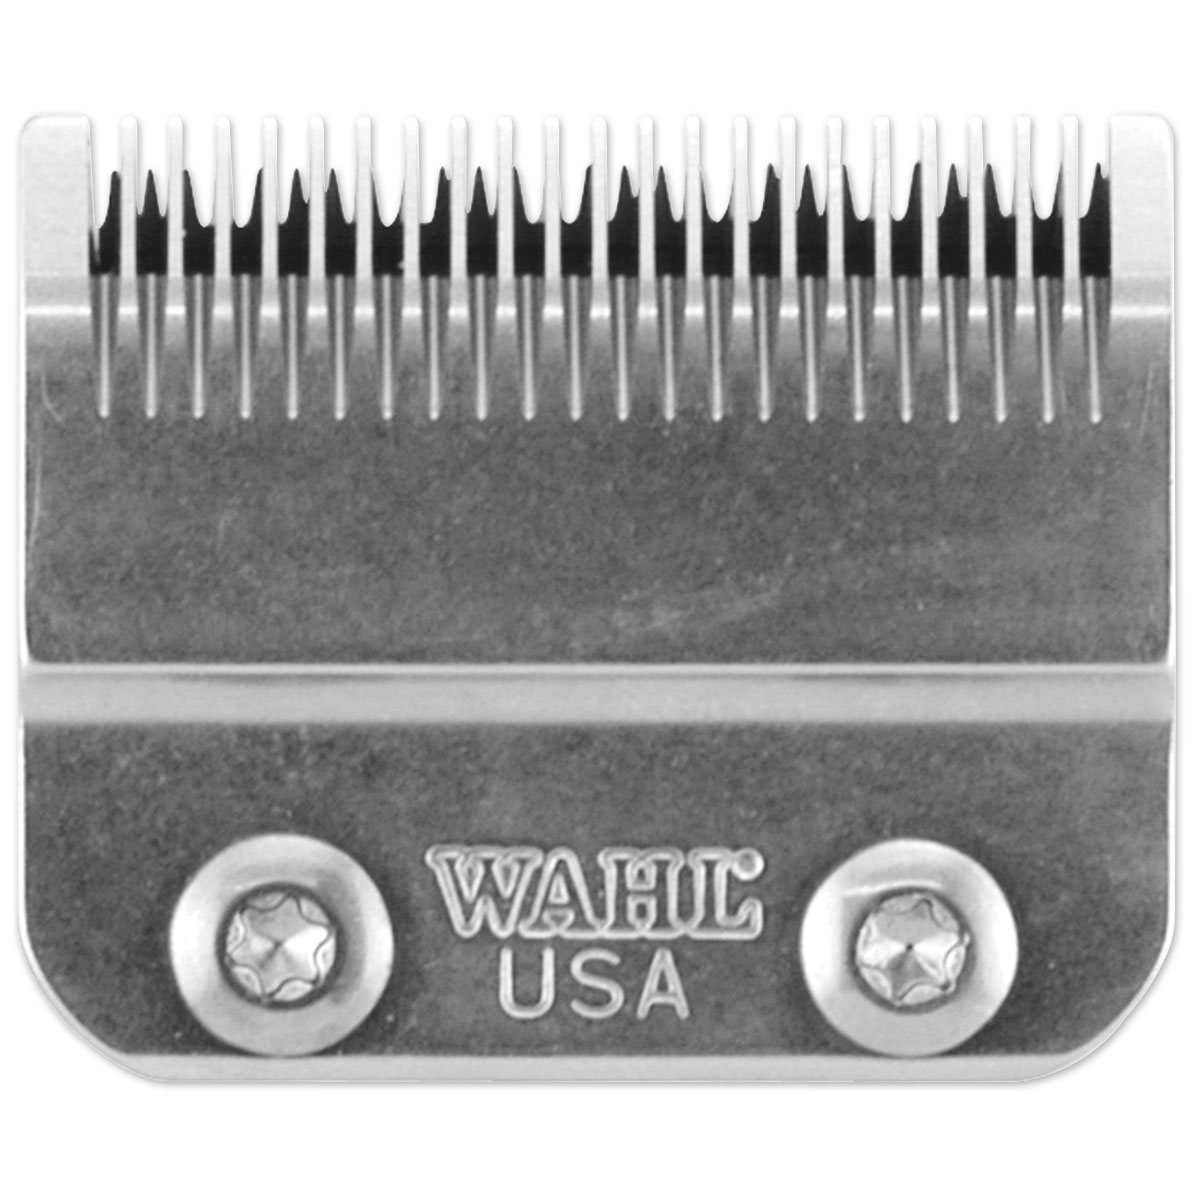 wahl pro series dog clipper replacement blades